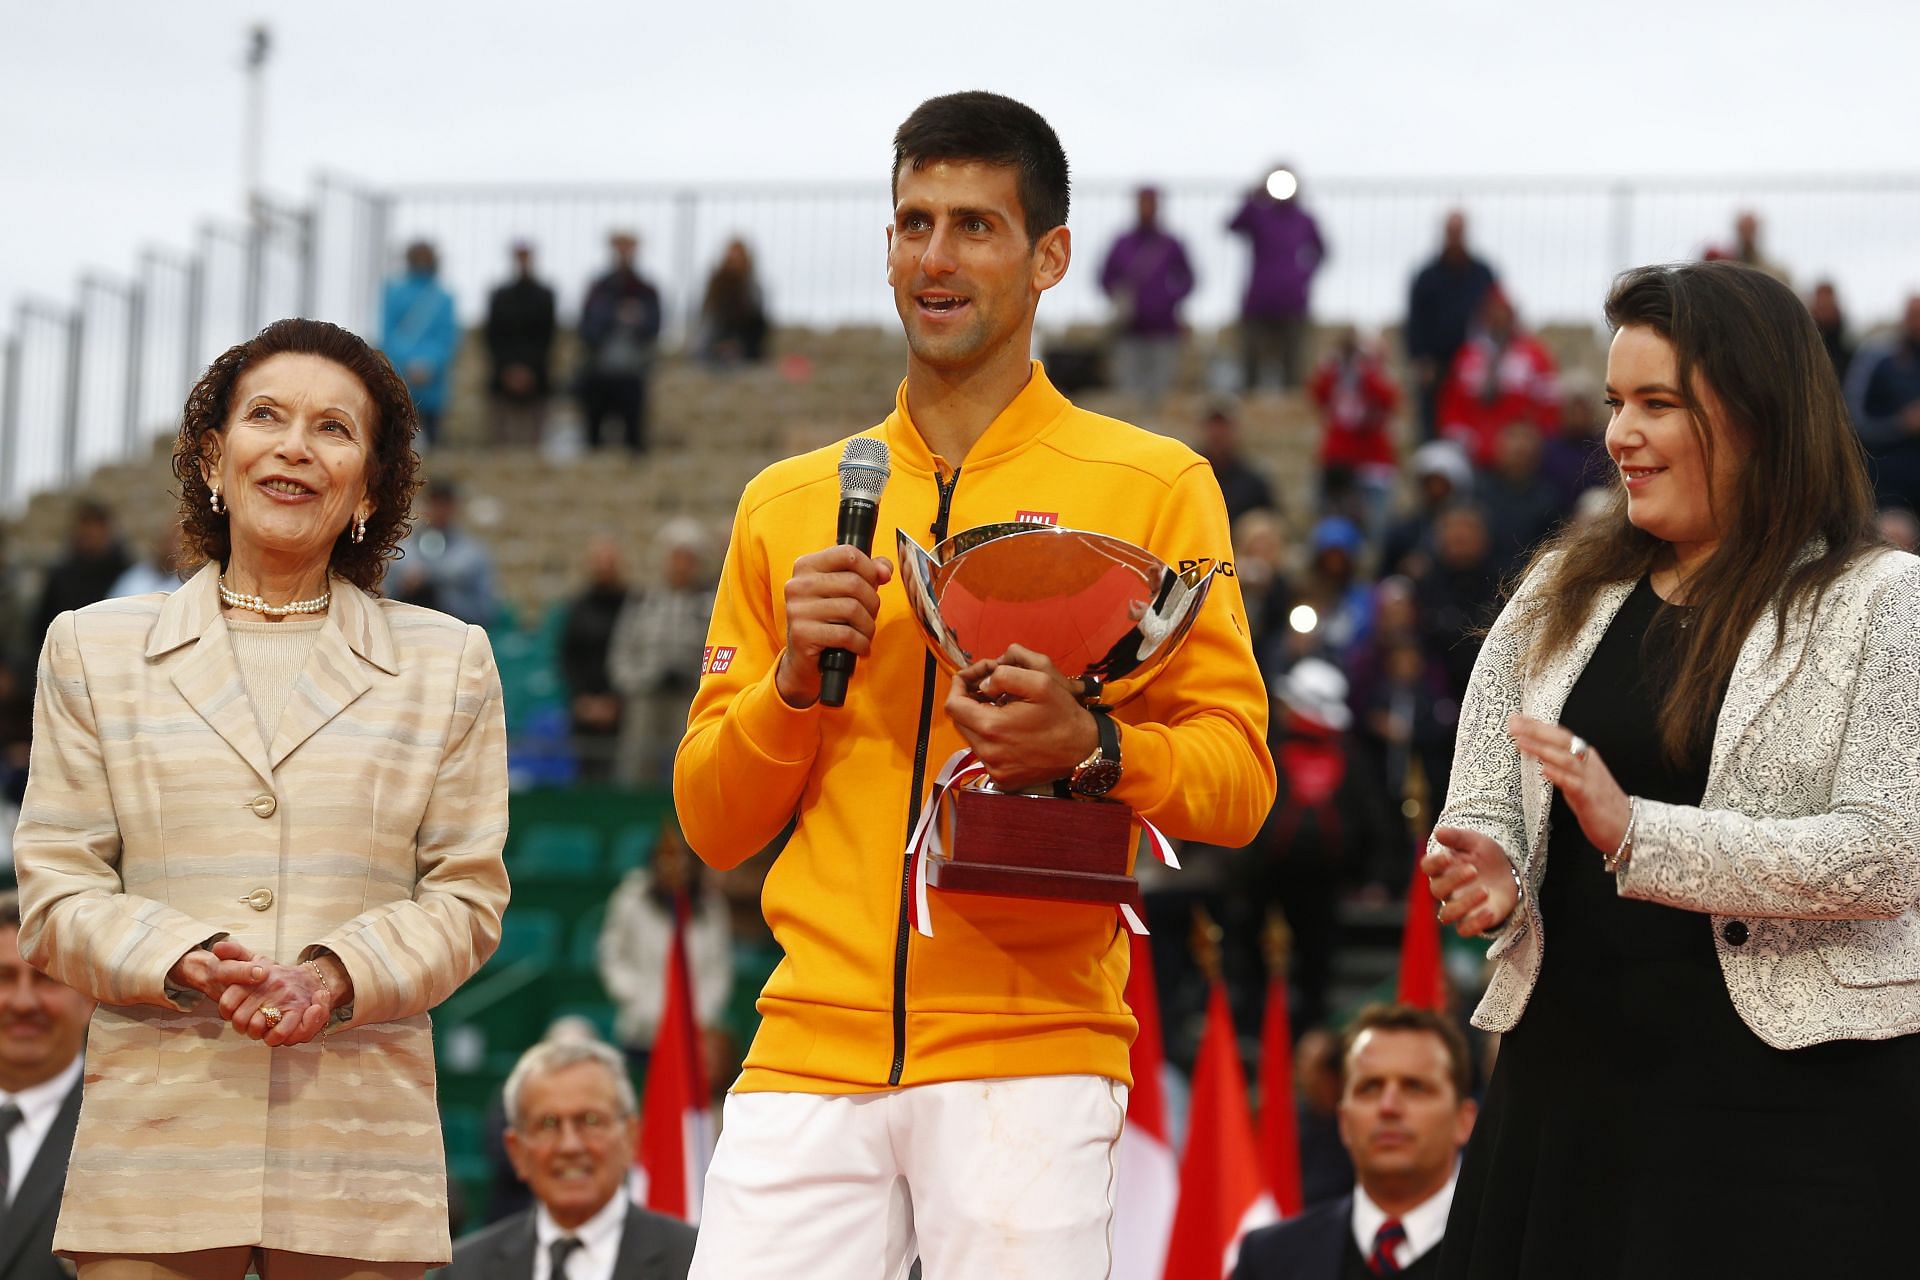 The Serb last lifted the Monte-Carlo Masters trophy in 2015